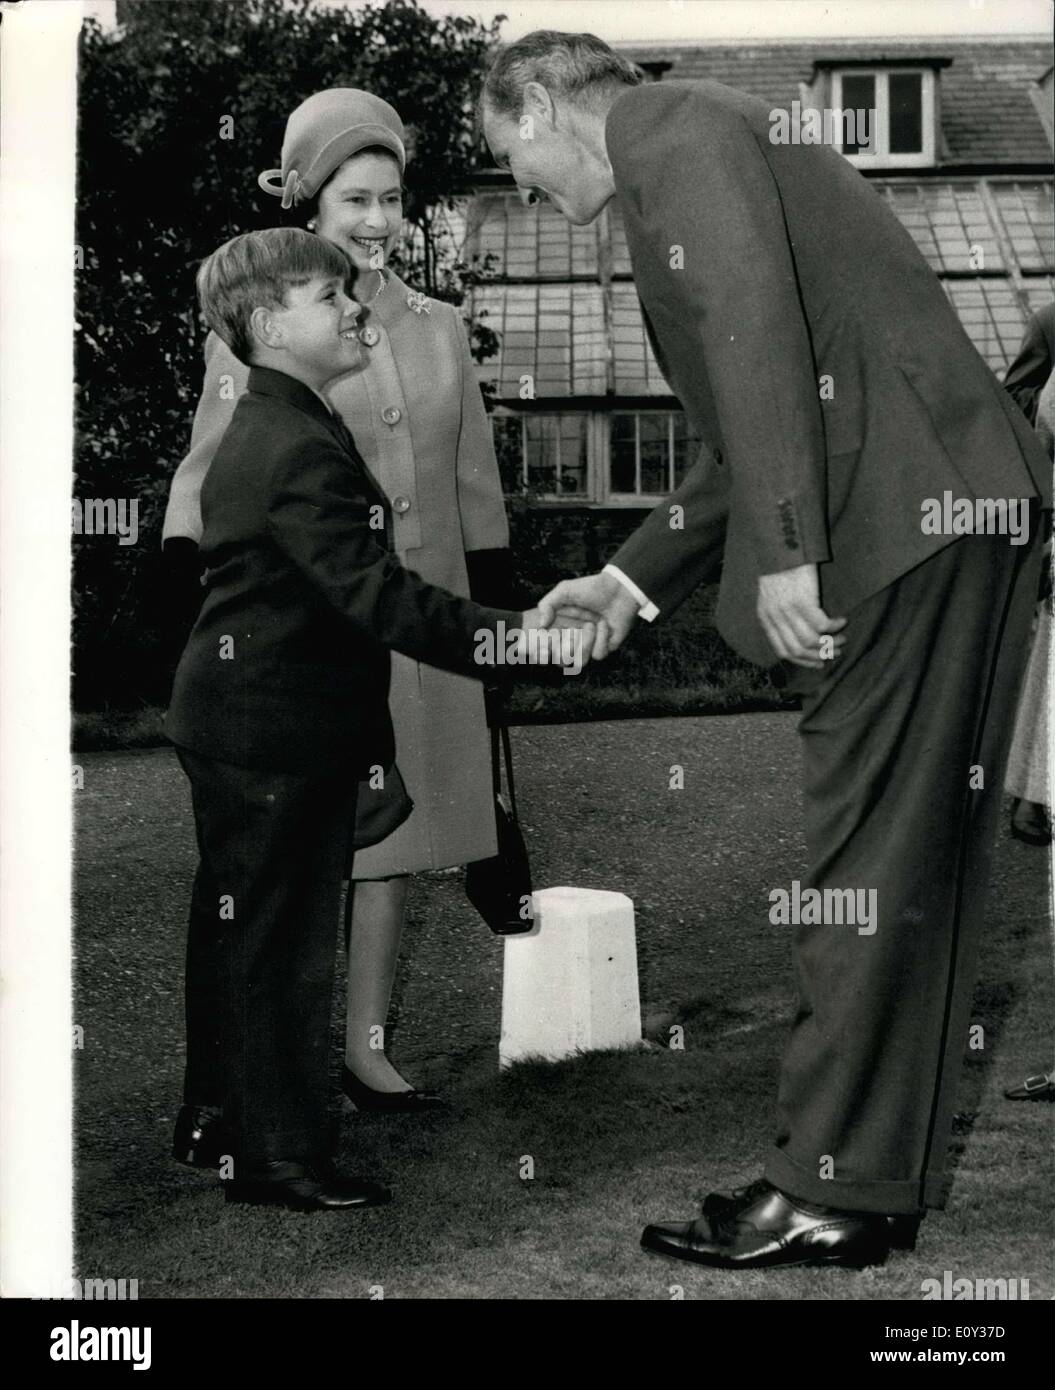 Sep. 14, 1968 - Prince Andrew goes to school: H.M The Queen looks on as her son, Prince Andrew, aged 8, shakes hands with Mr. James Edwards, headmaster of Heatherdown Preparatory School, at Ascot, Berks, yesterday. Prince Andrew had just arrived to sign on as as a boarder at the school. He joins 80 other boarders at the school.He eight and thirteen. He will sleep in a dormitory and go to chapel daily. Stock Photo